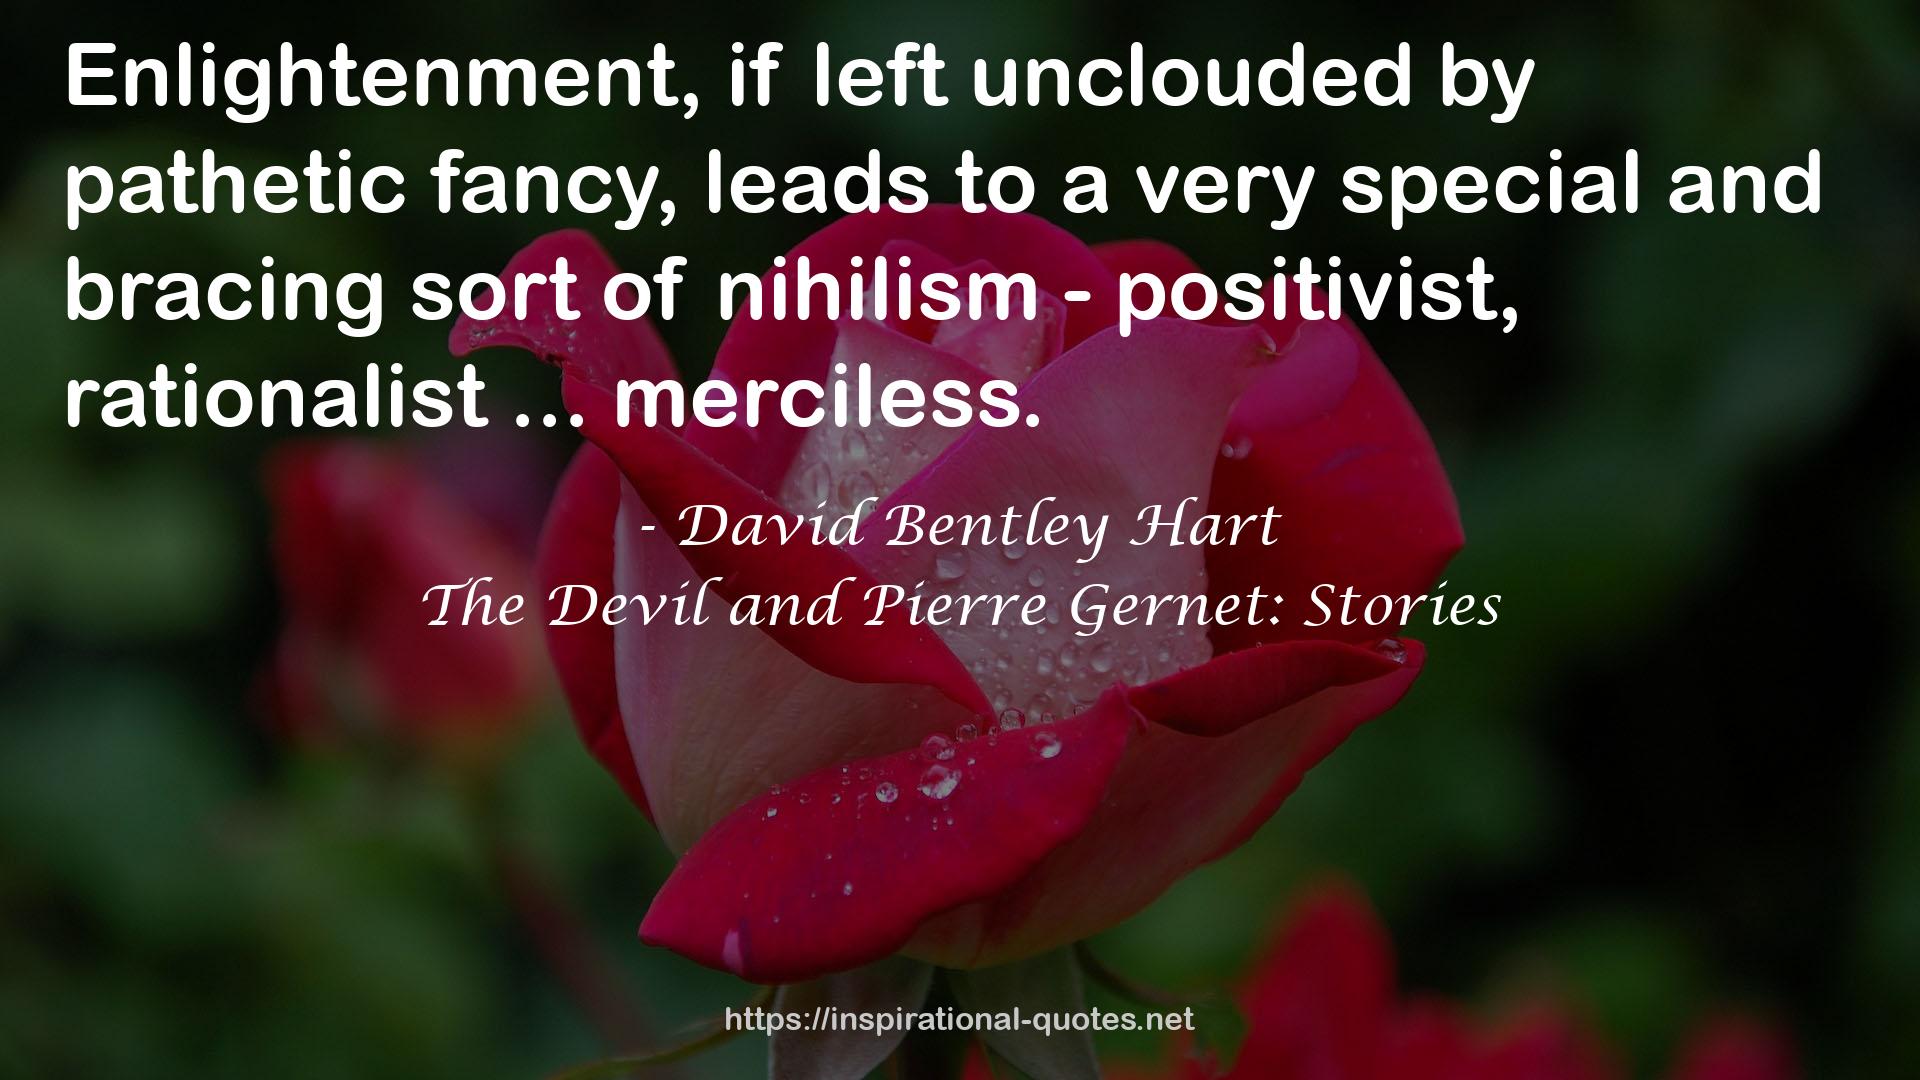 The Devil and Pierre Gernet: Stories QUOTES